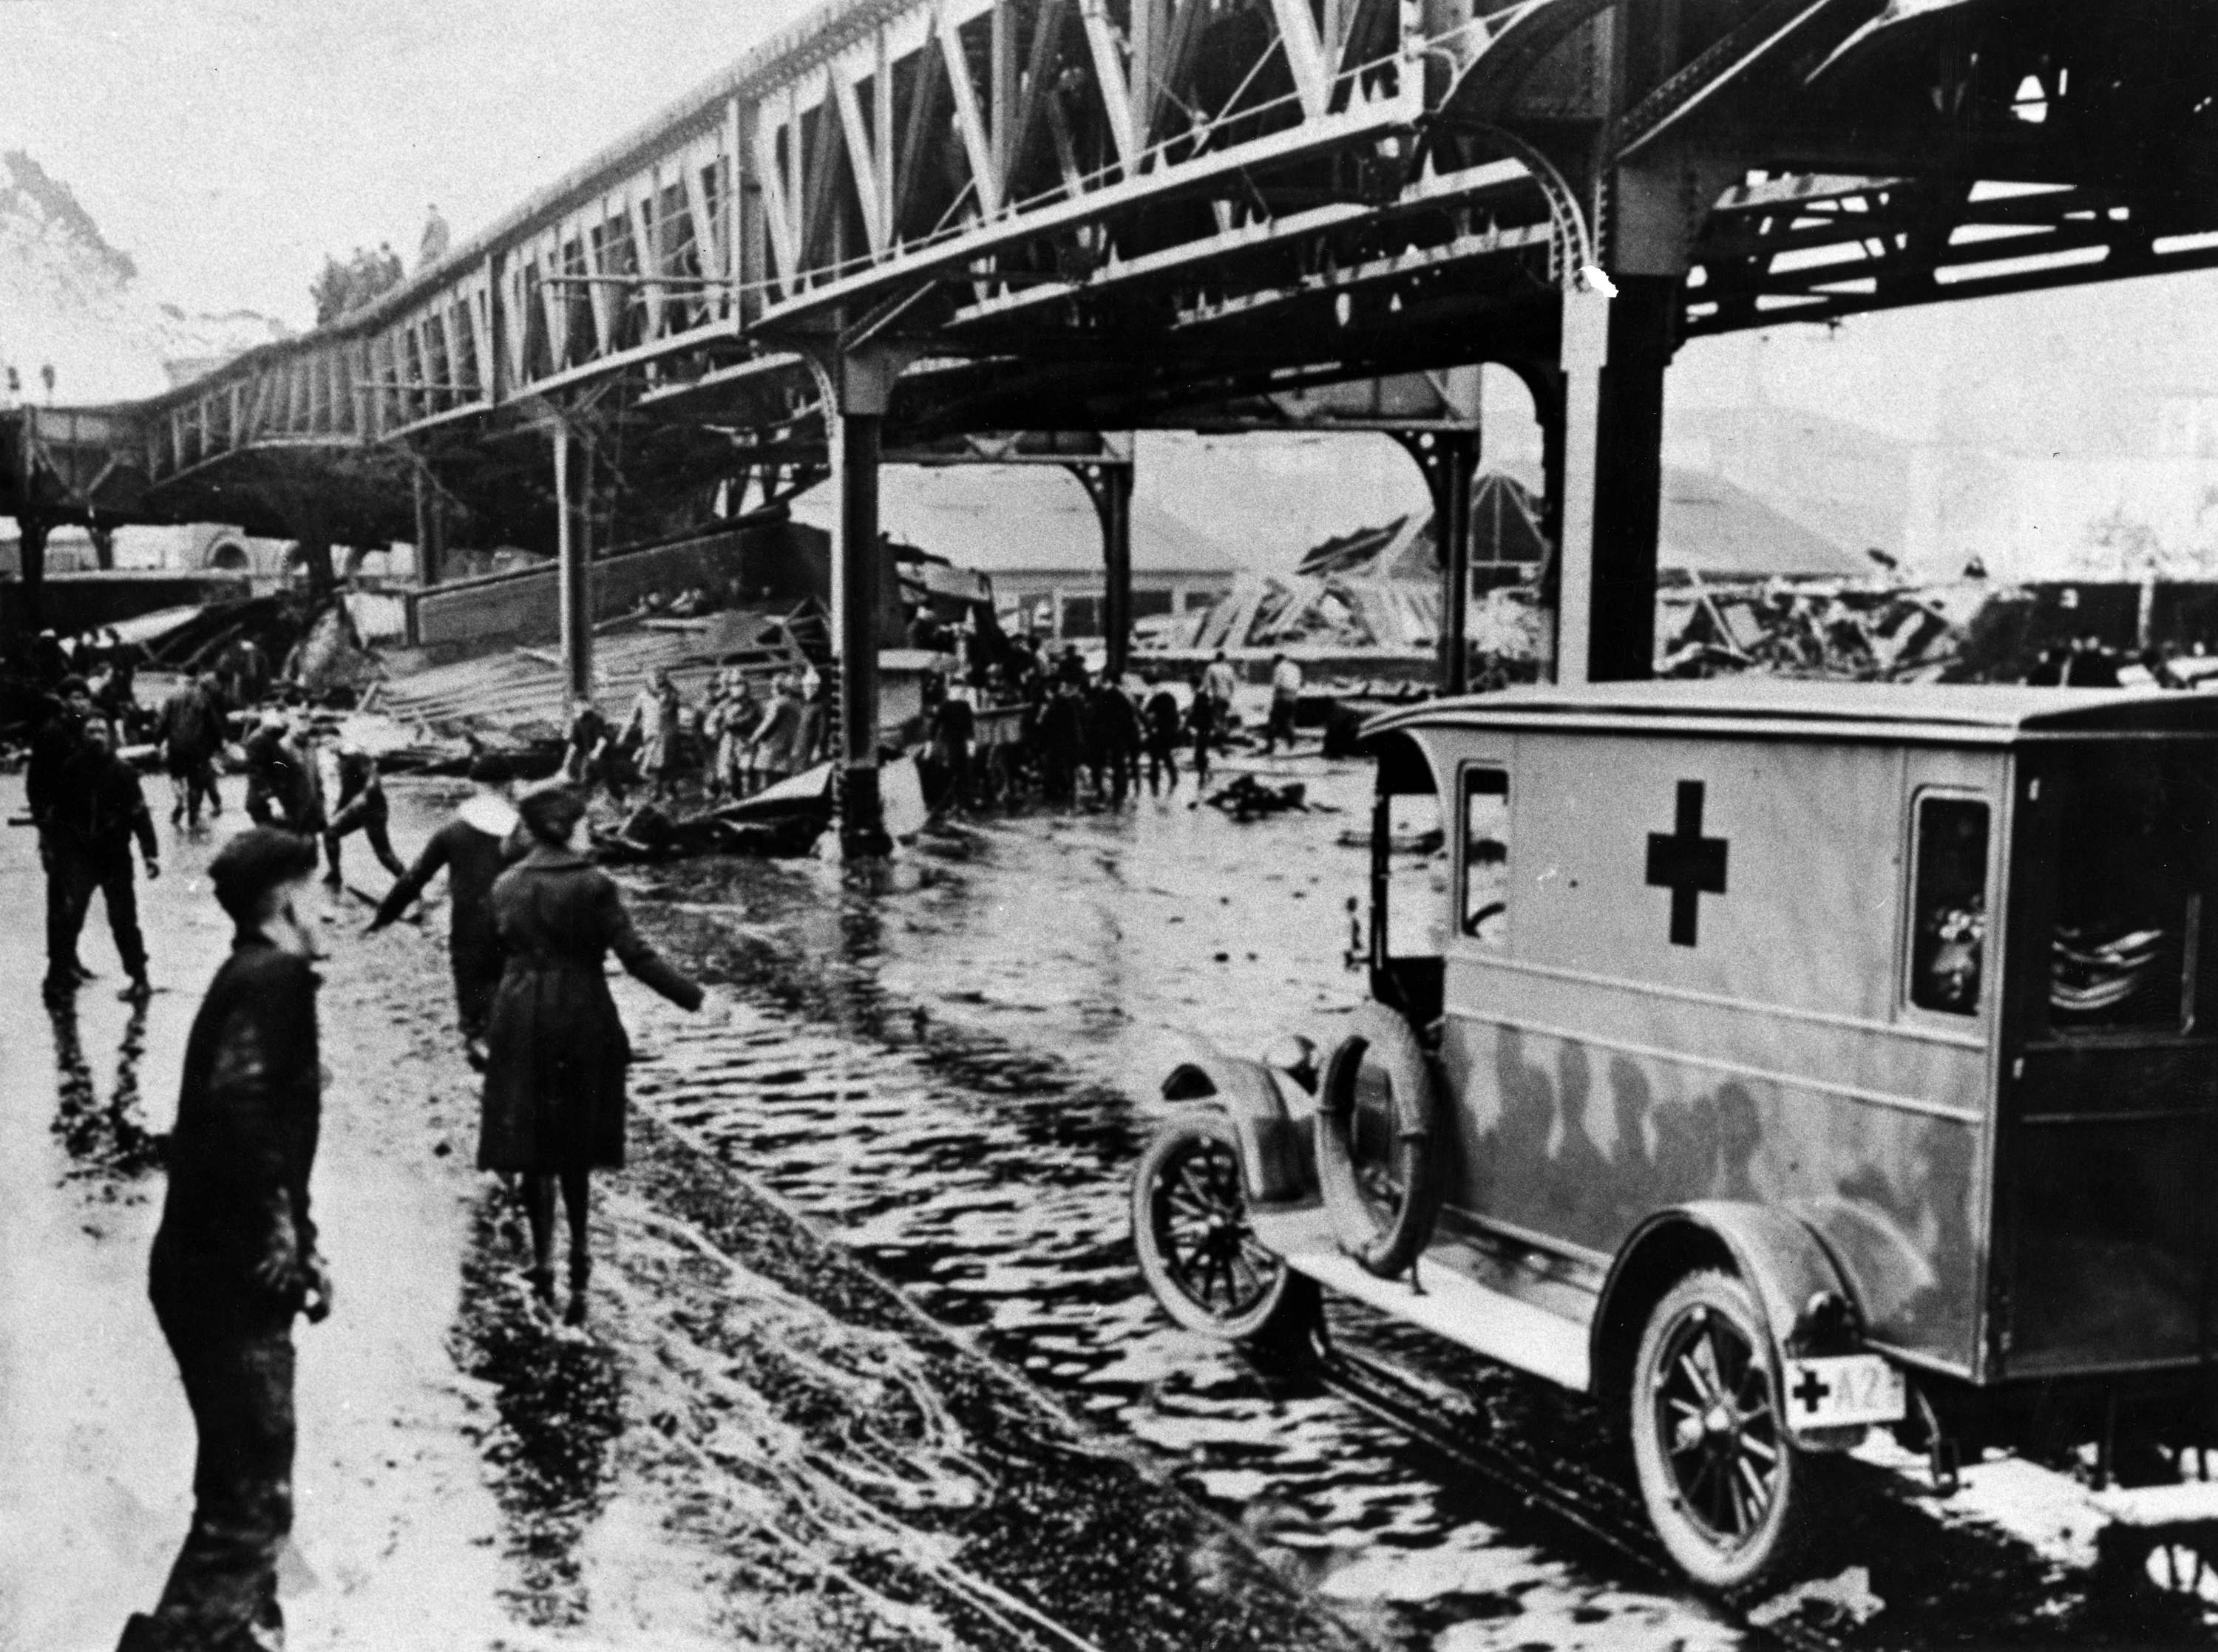 Police, firemen, Red Cross workers, civilian volunteers and cadets from the USS Nantucket training ship berthed nearby rushed to the scene on Jan. 15, 1919, after a giant tank in the North End of Boston collapsed, sending a wave of an estimated 2.3 million gallons of molasses through the streets. (Boston Globe via Getty Images)